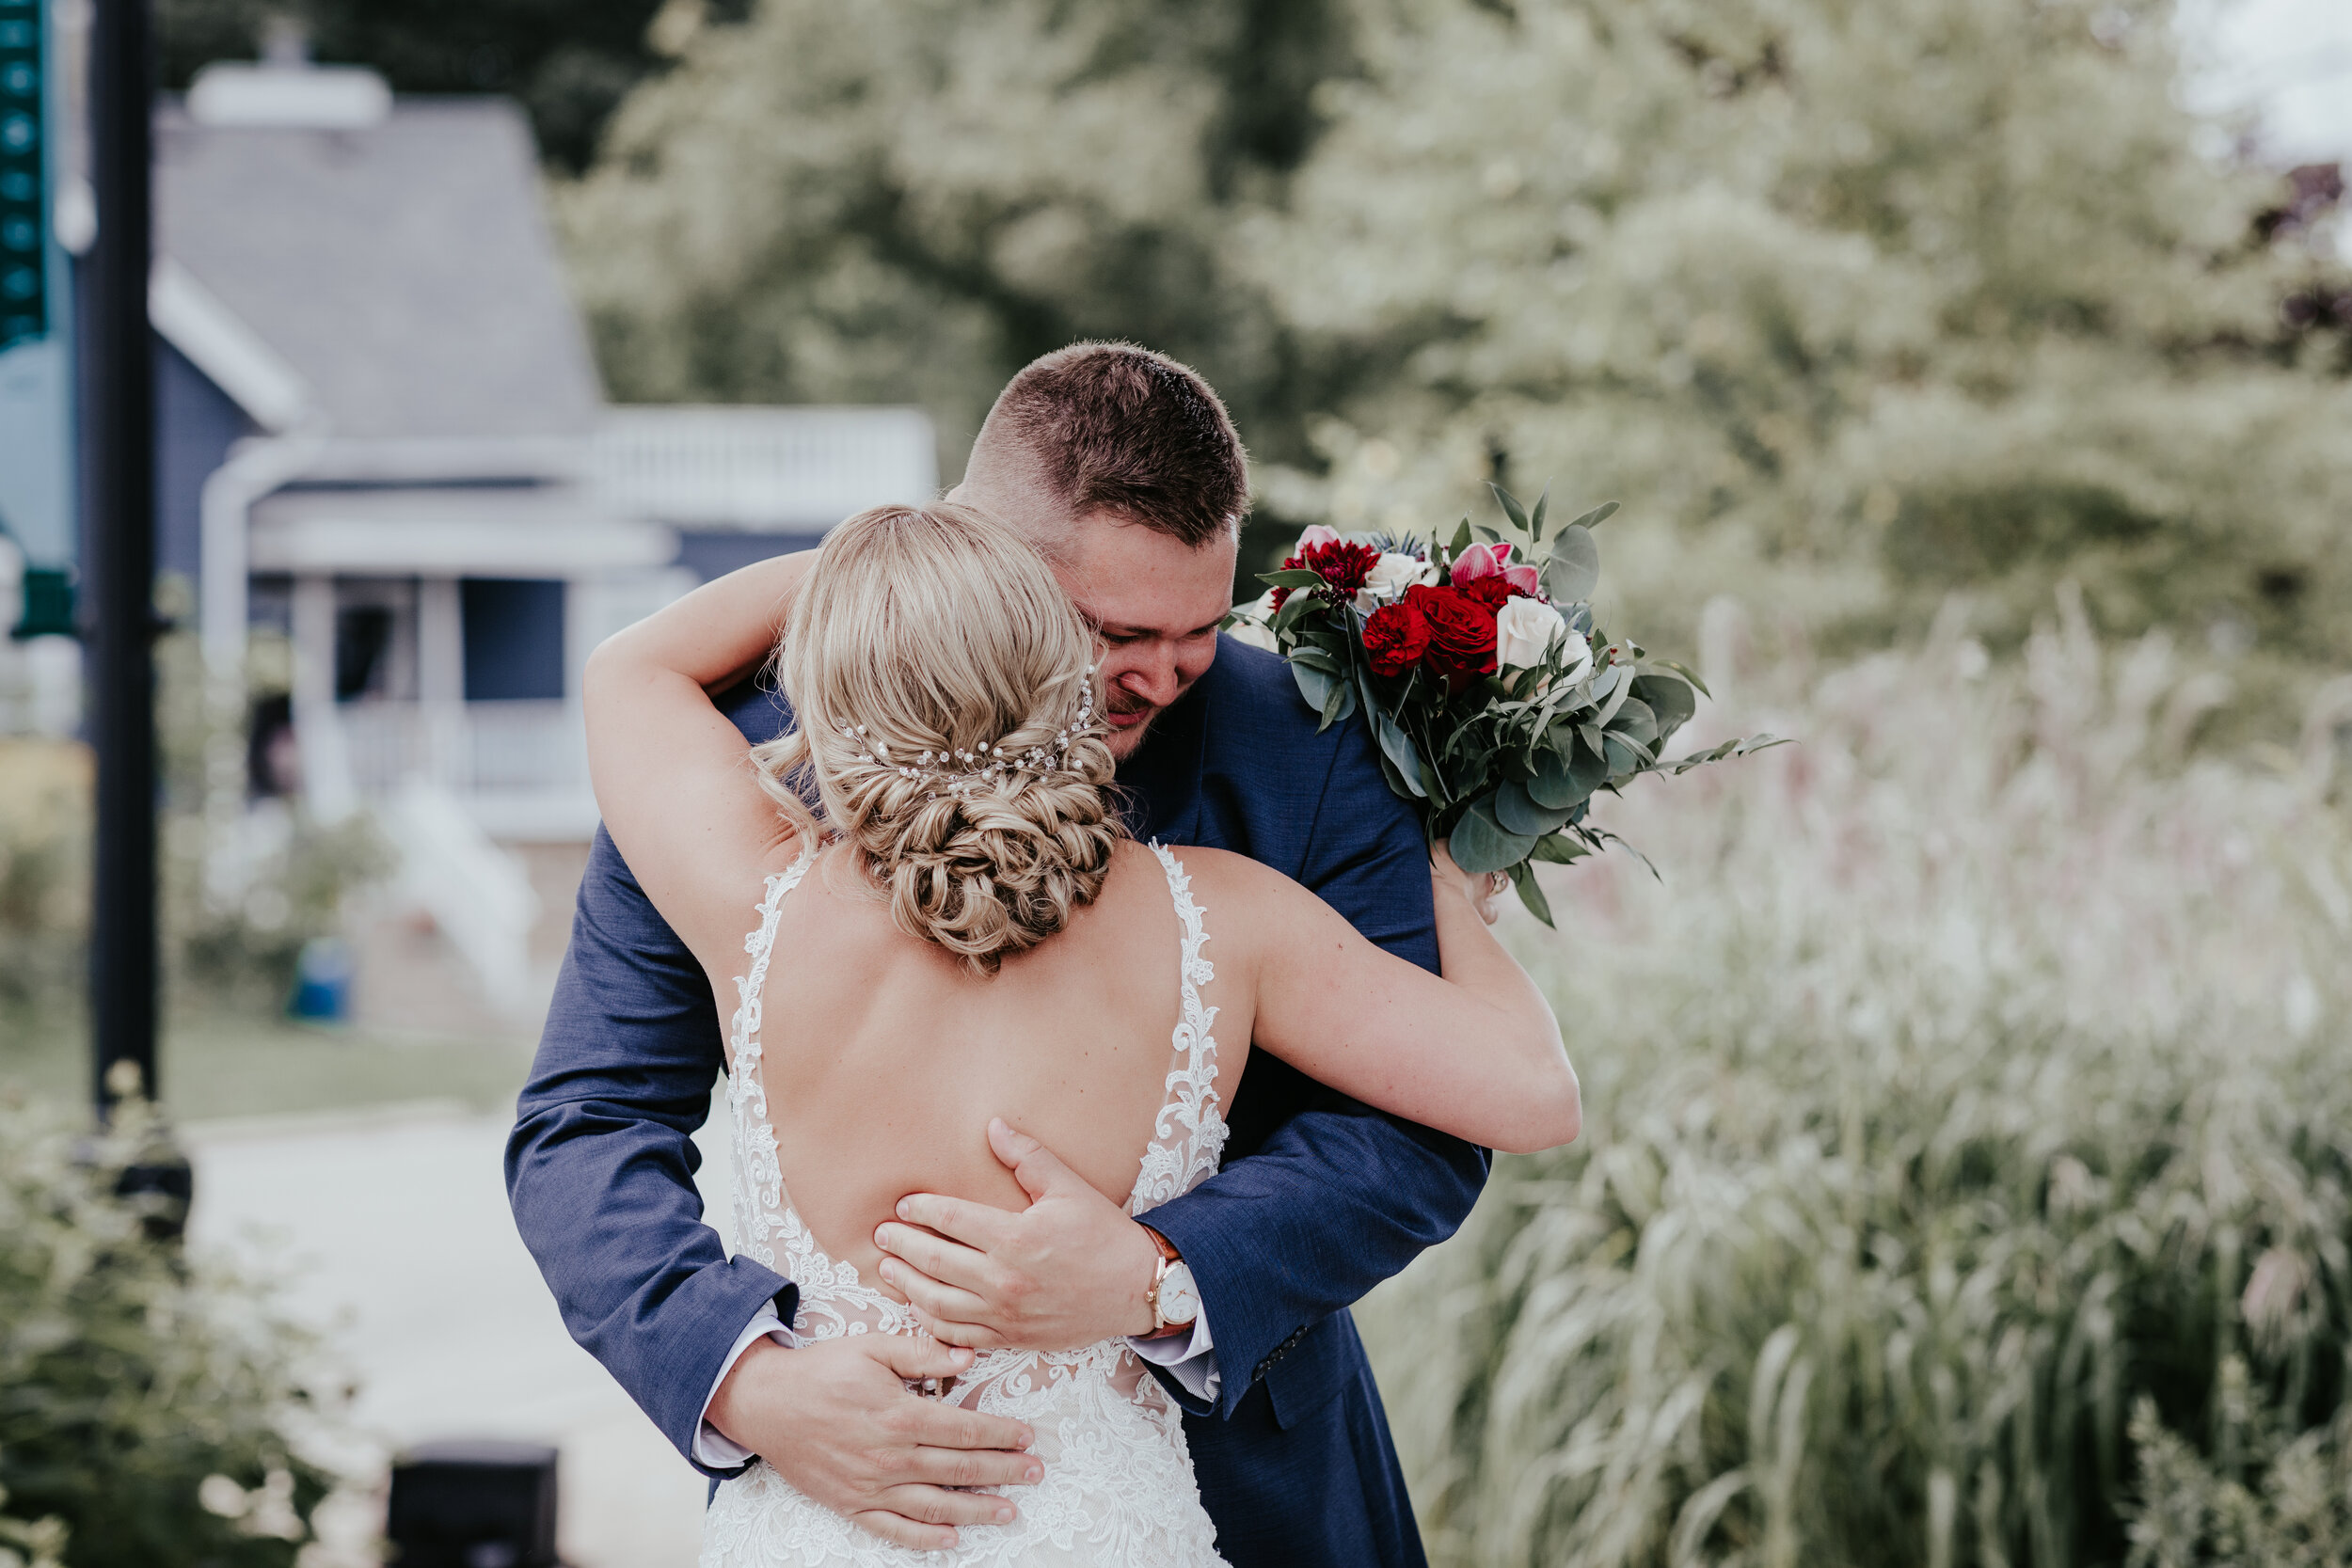 Bride and Groom first look Danielle Schury Photography Copyright 2019 (18).JPG